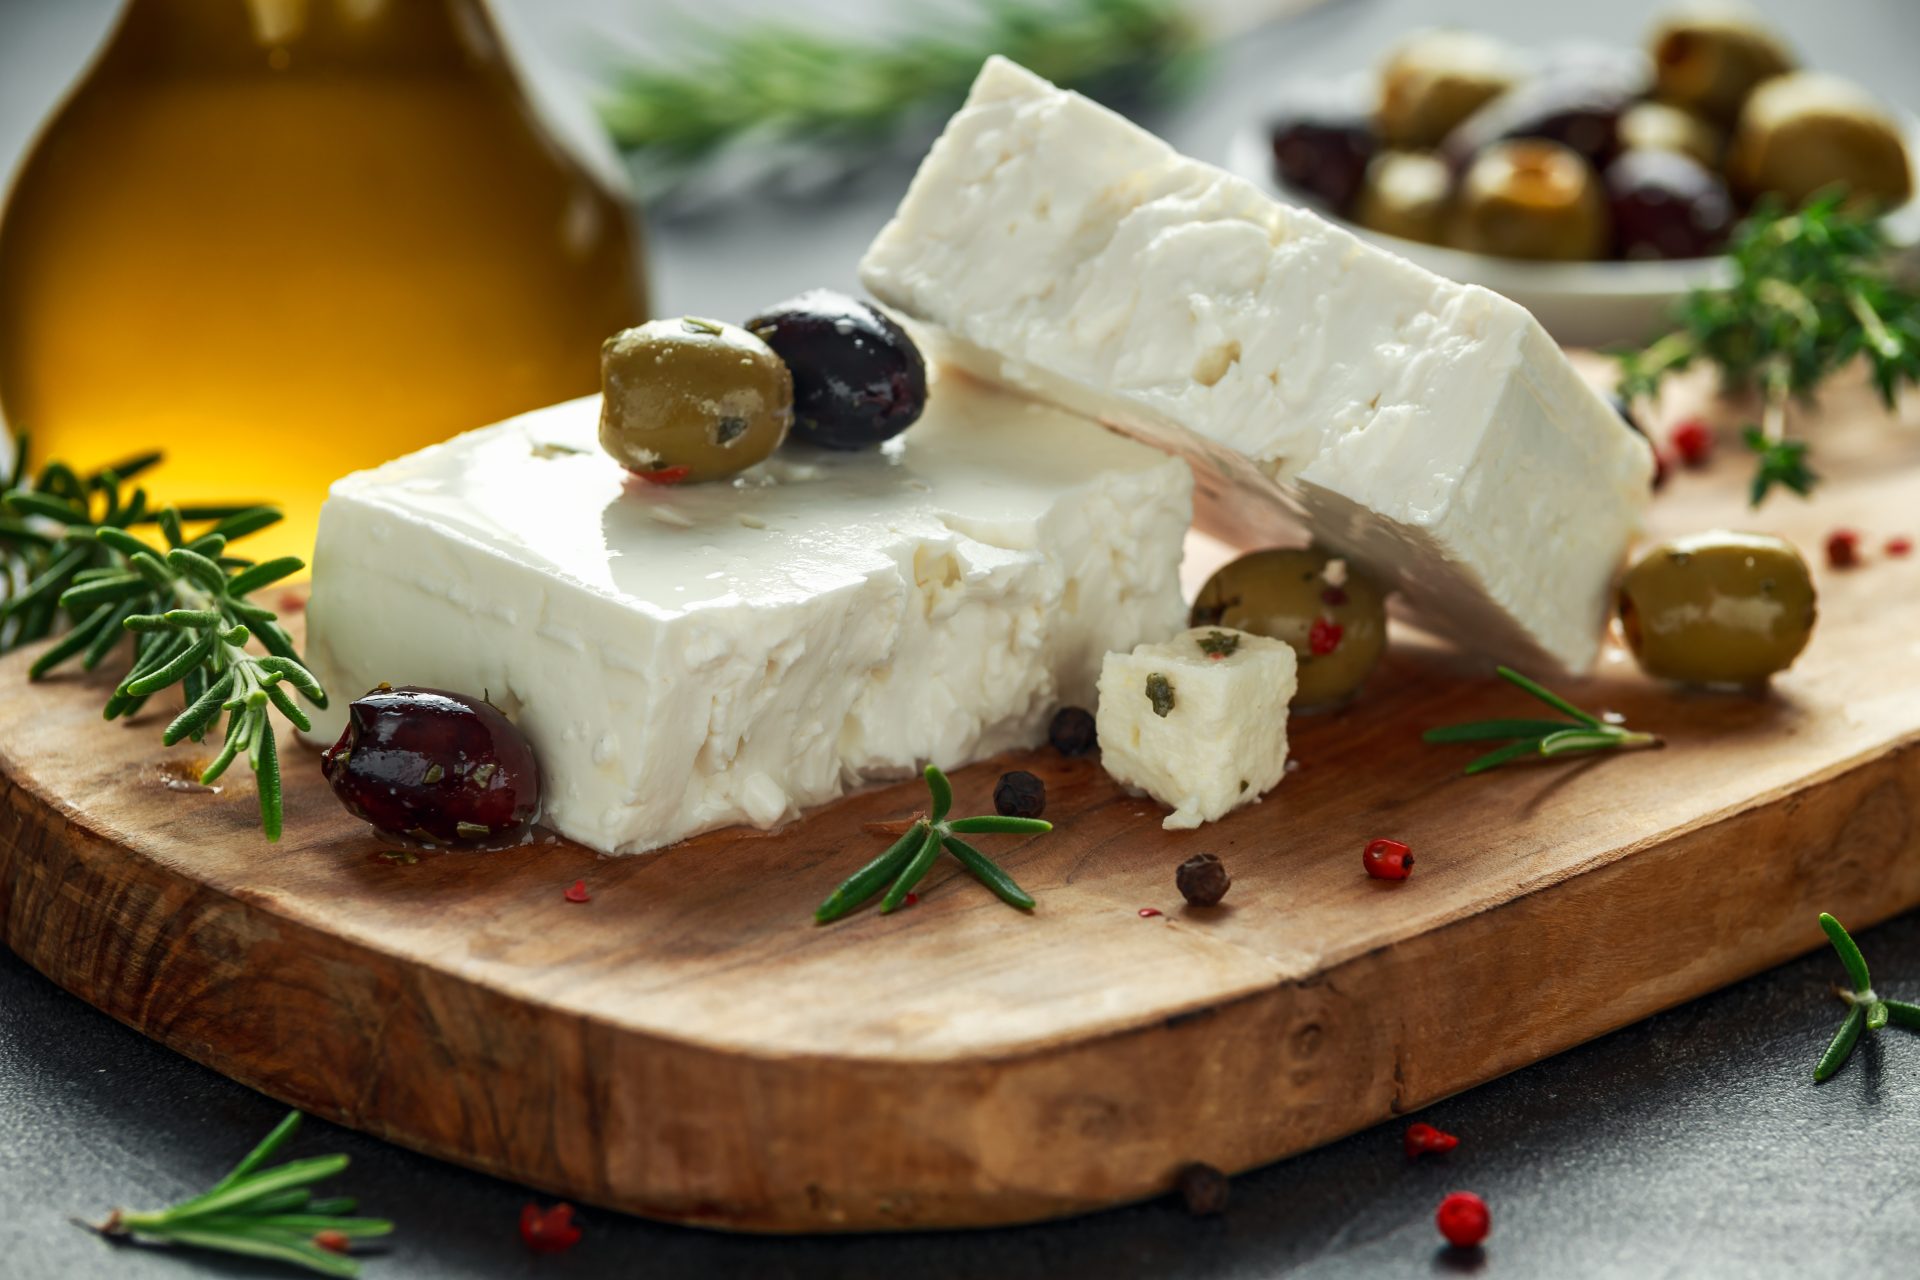 Shepherd's cheese and feta: Are all cheeses sheep's cheese?